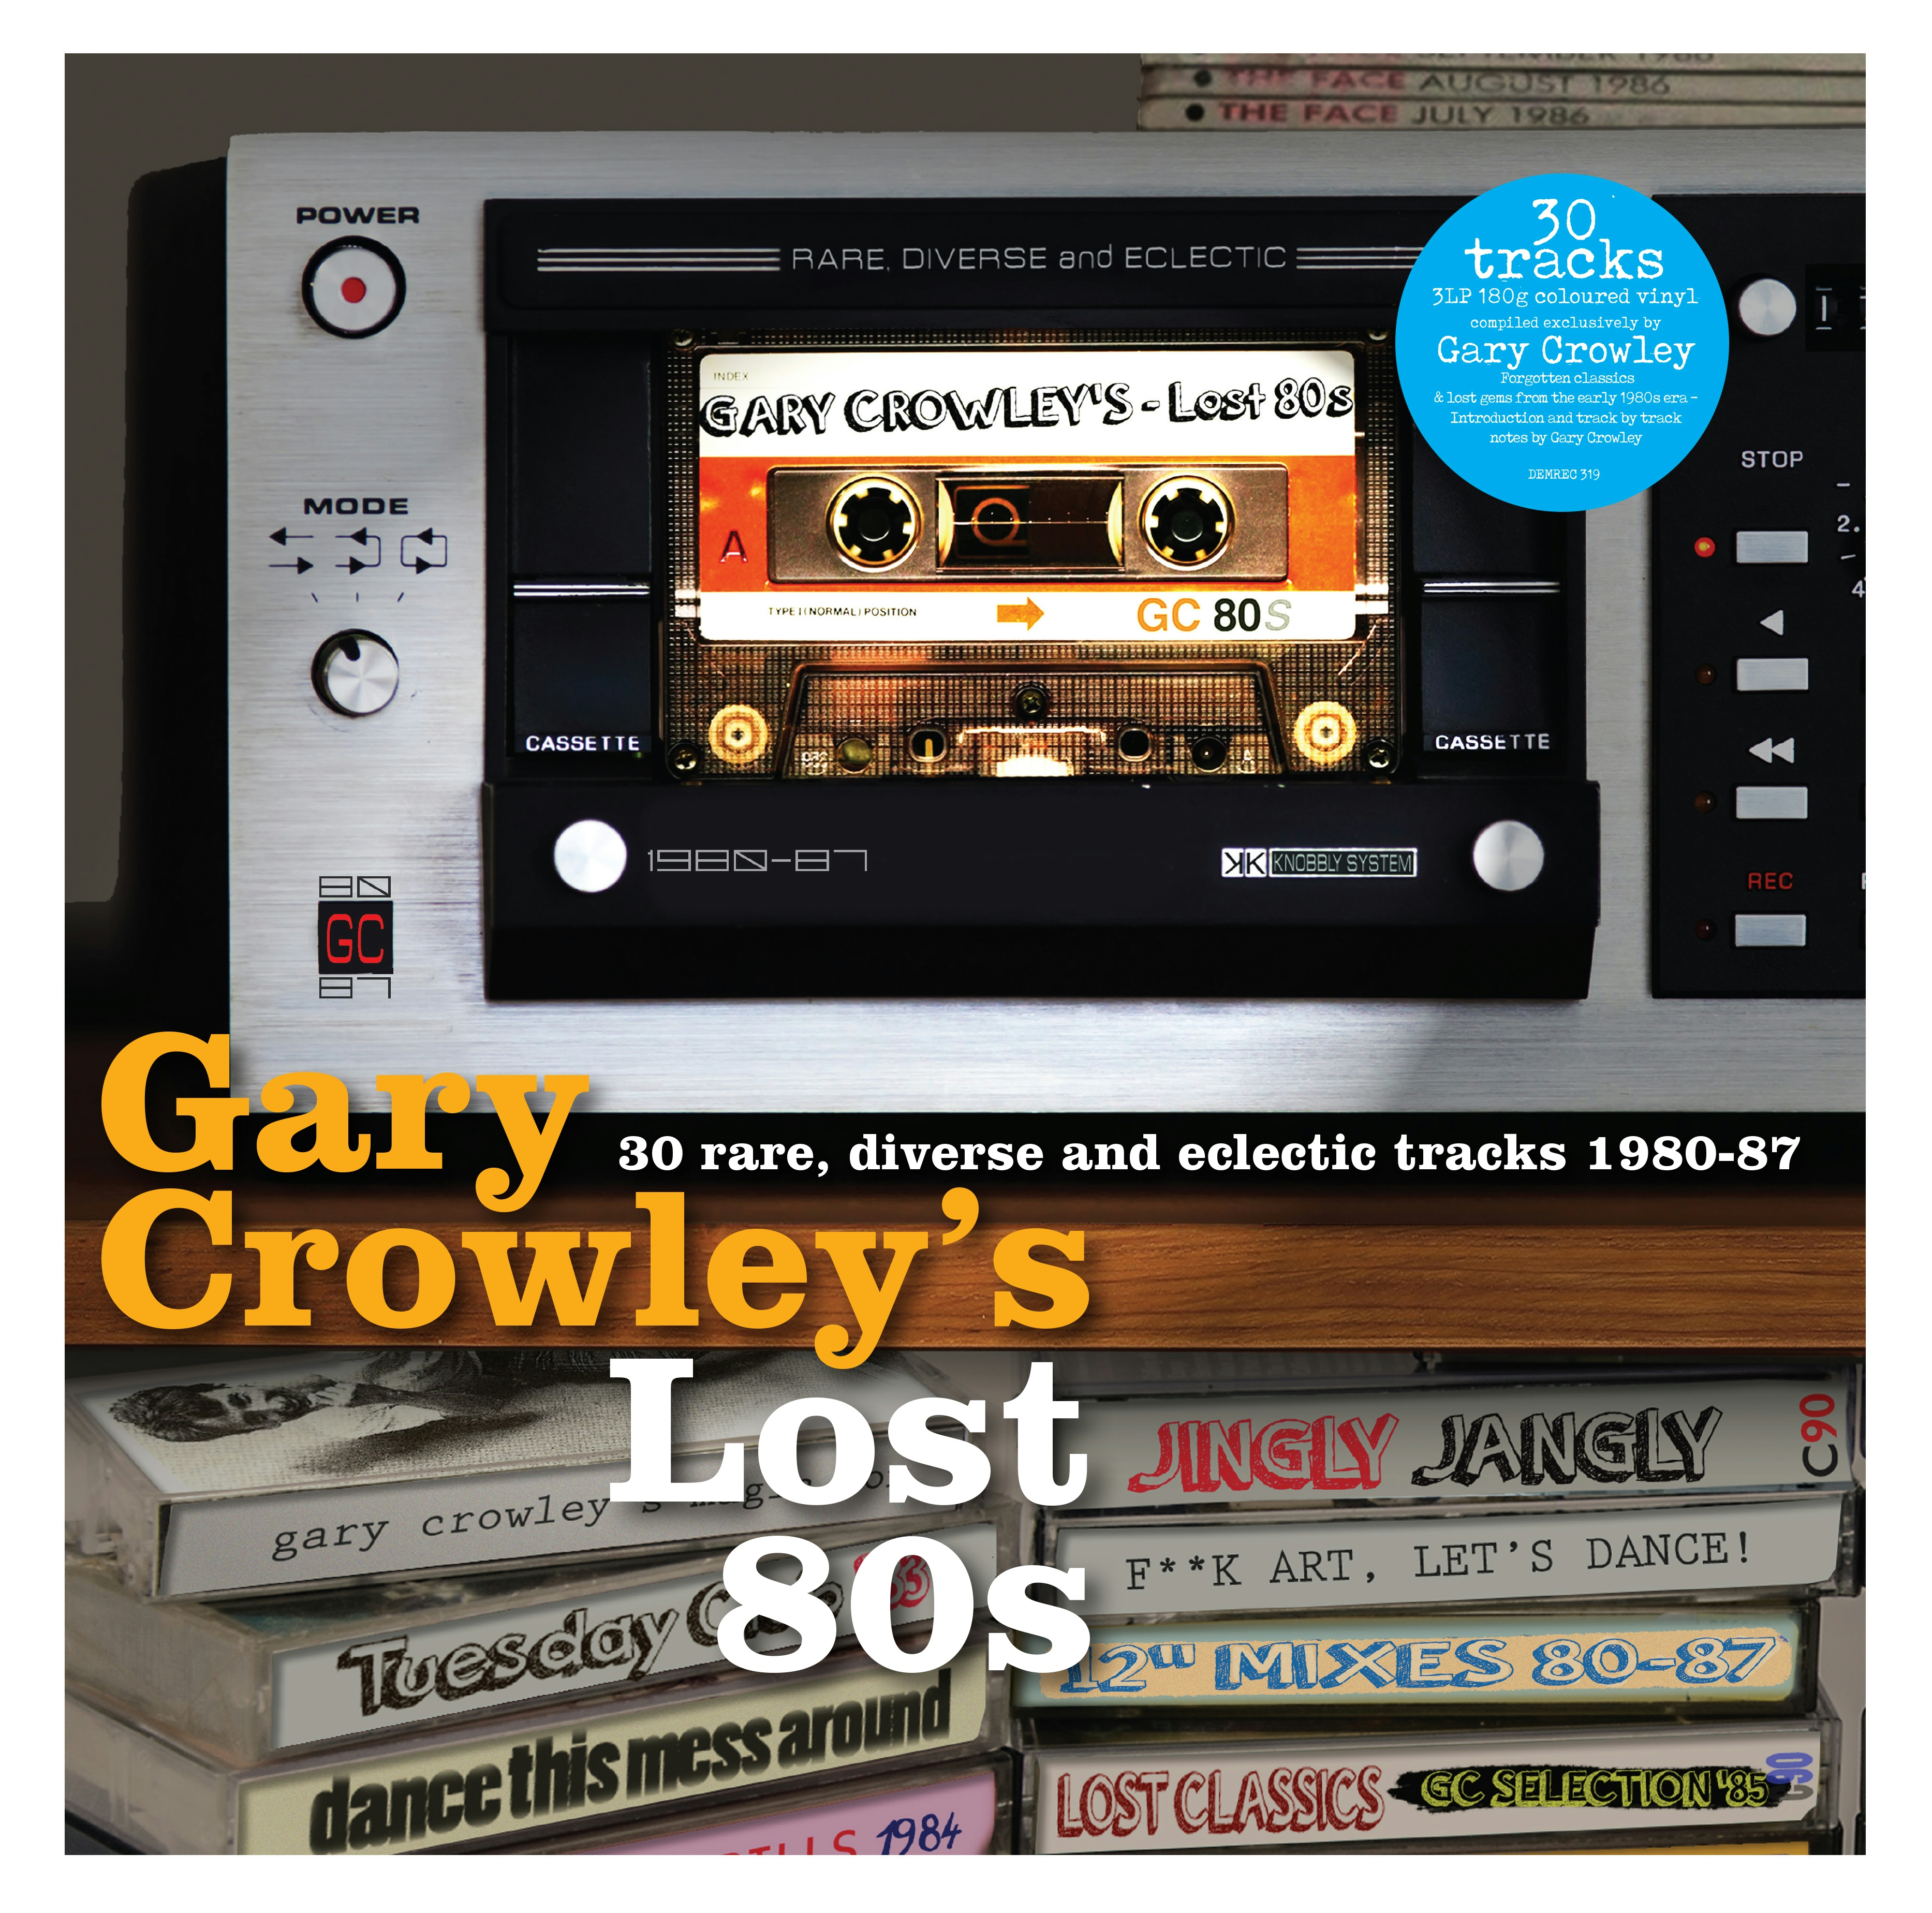 Album artwork for Gary Crowley’s Lost 80s by Various